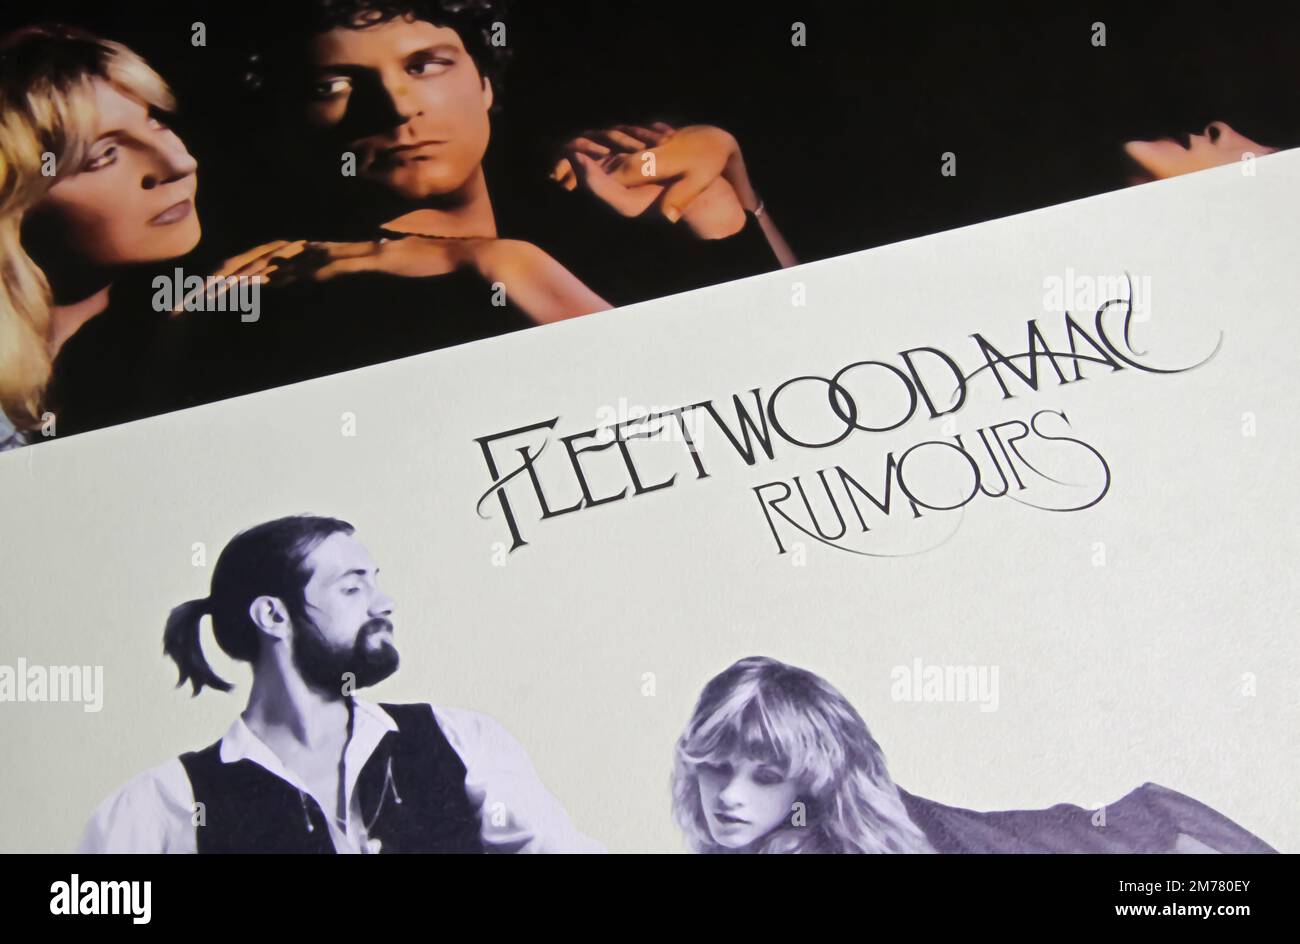 Viersen, Germany - November 9. 2022: Closeup of isolated vinyl record album cover Rumours from Fleetwood Mac, 1977 Stock Photo